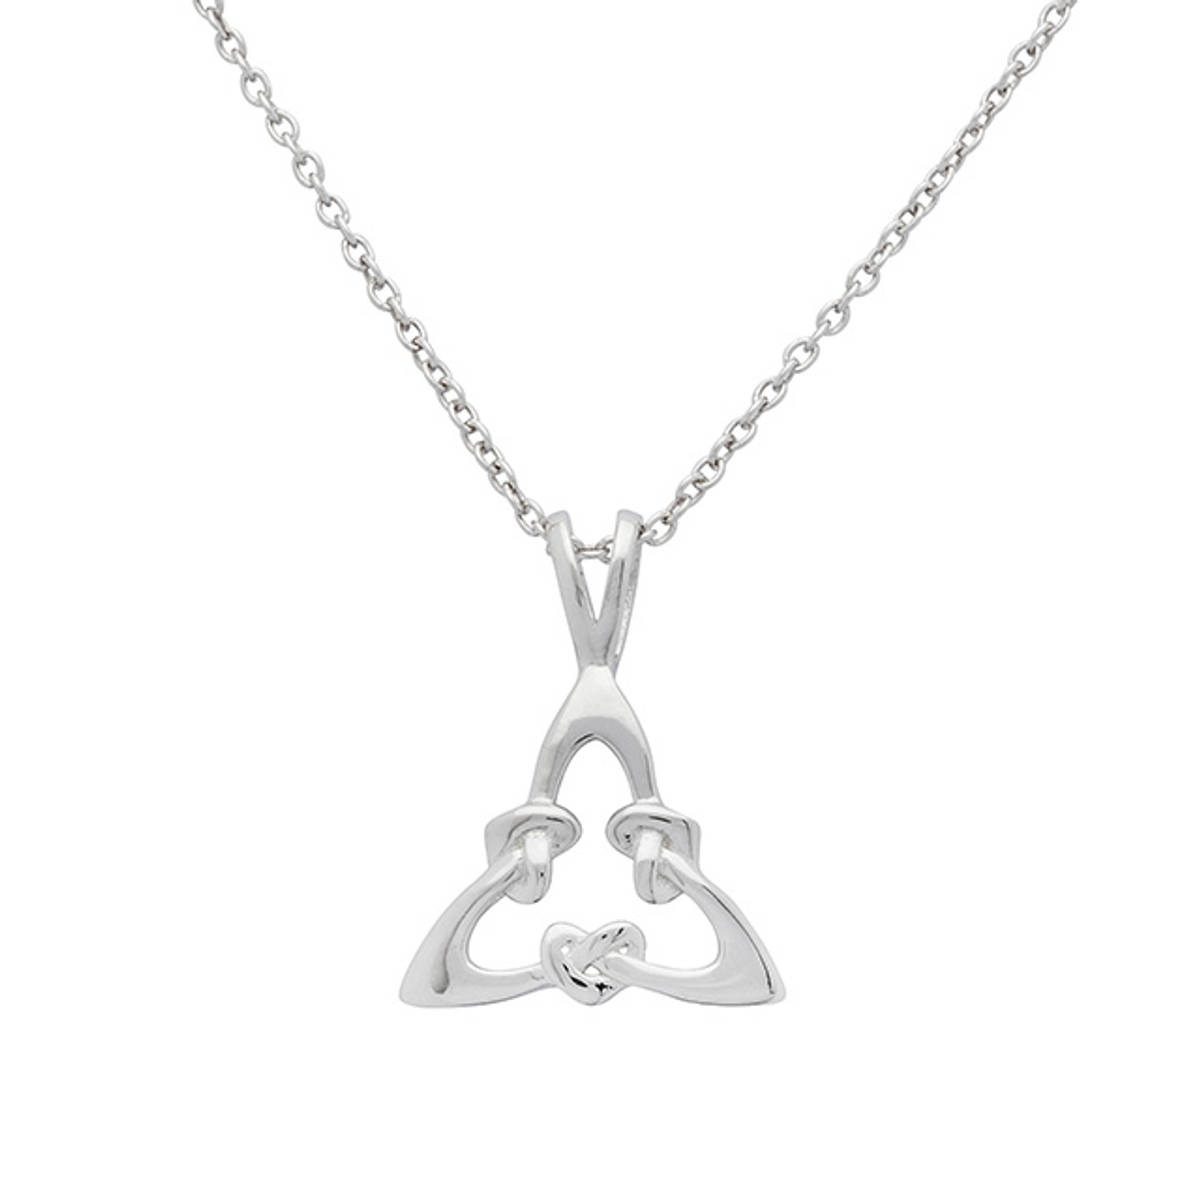 Sterling Silver Triangular Celtic Heart Knot Pendant

Size: 15mm
Chain: 18 inche